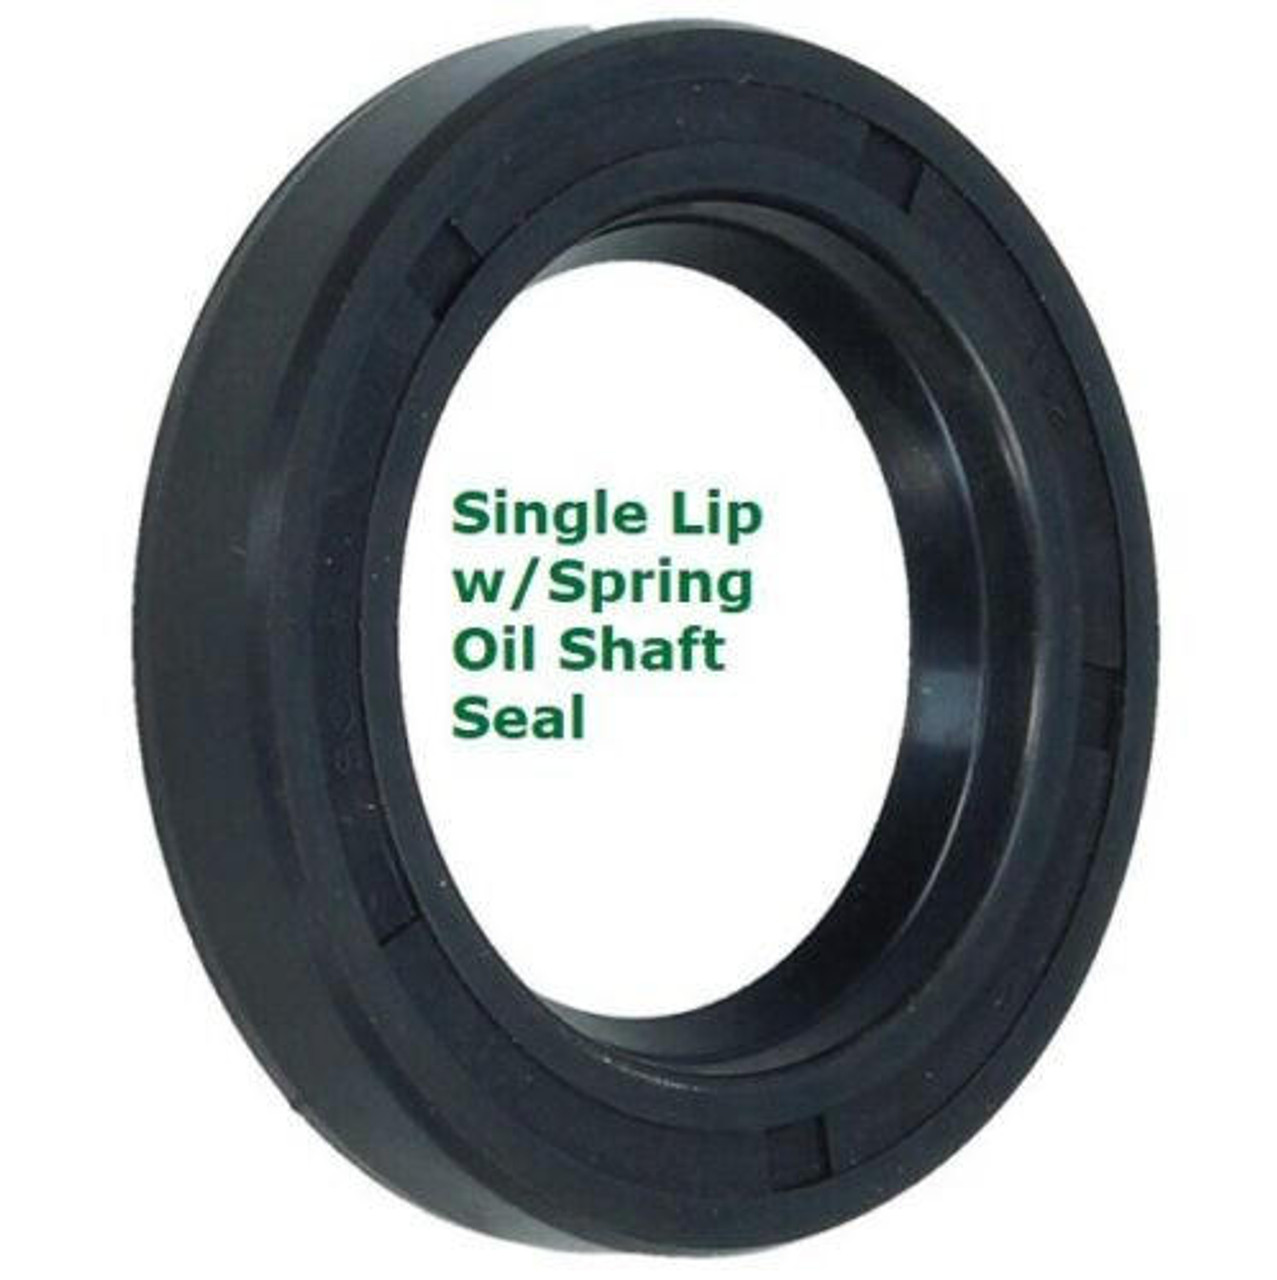 Metric Oil Shaft Seal 20 x 47 x 8mm Single Liip  Price for 1 pc